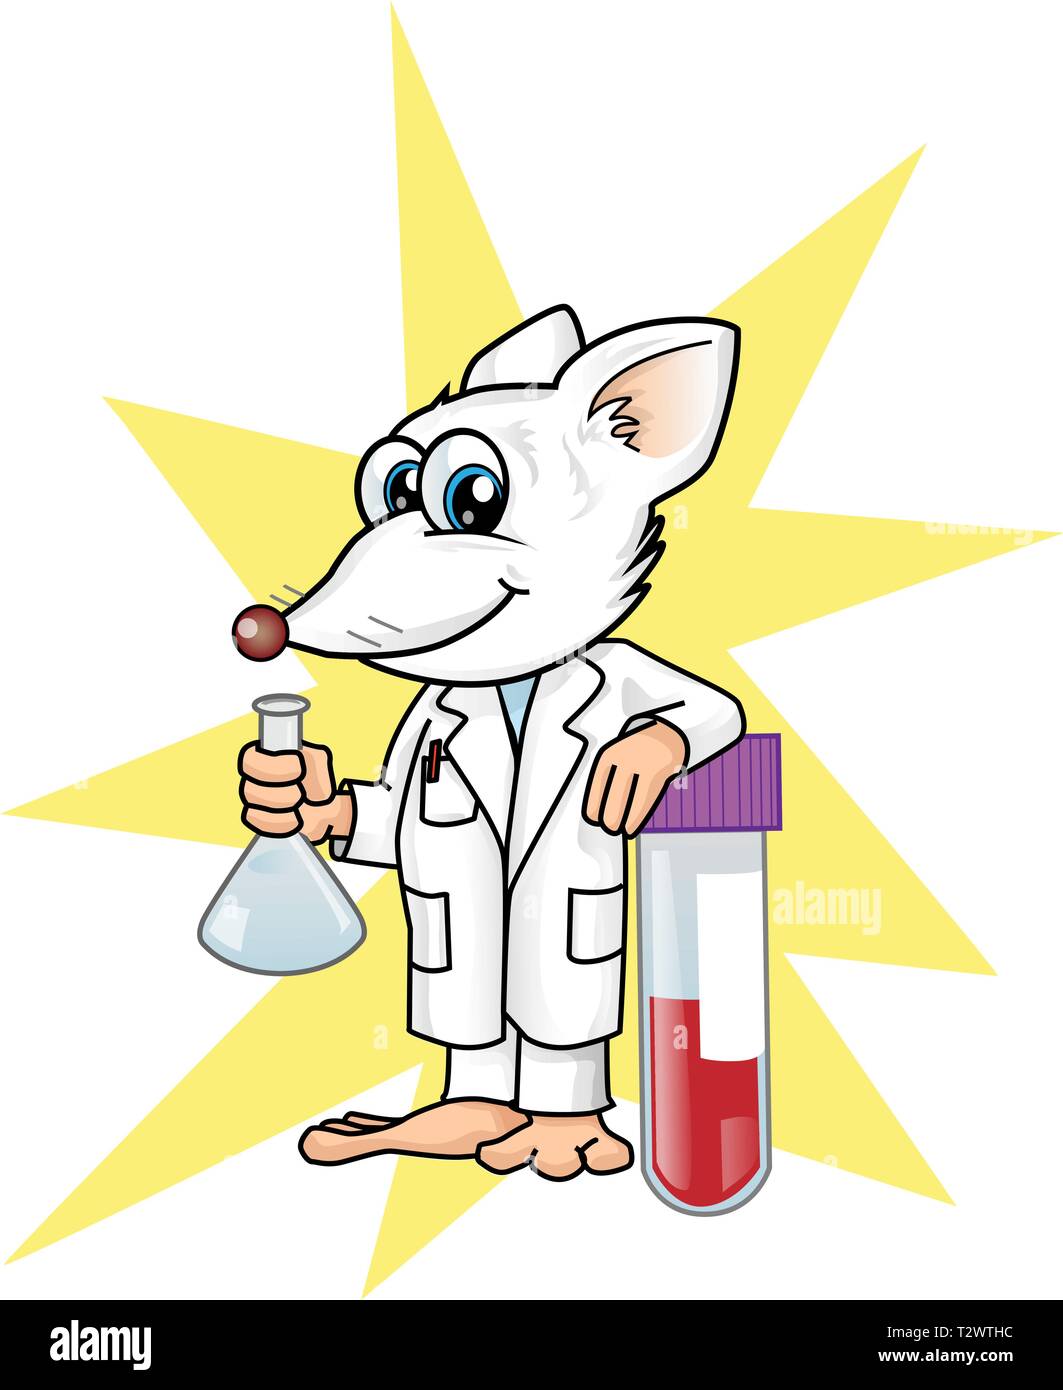 rat lab character cartoon on star background Stock Vector